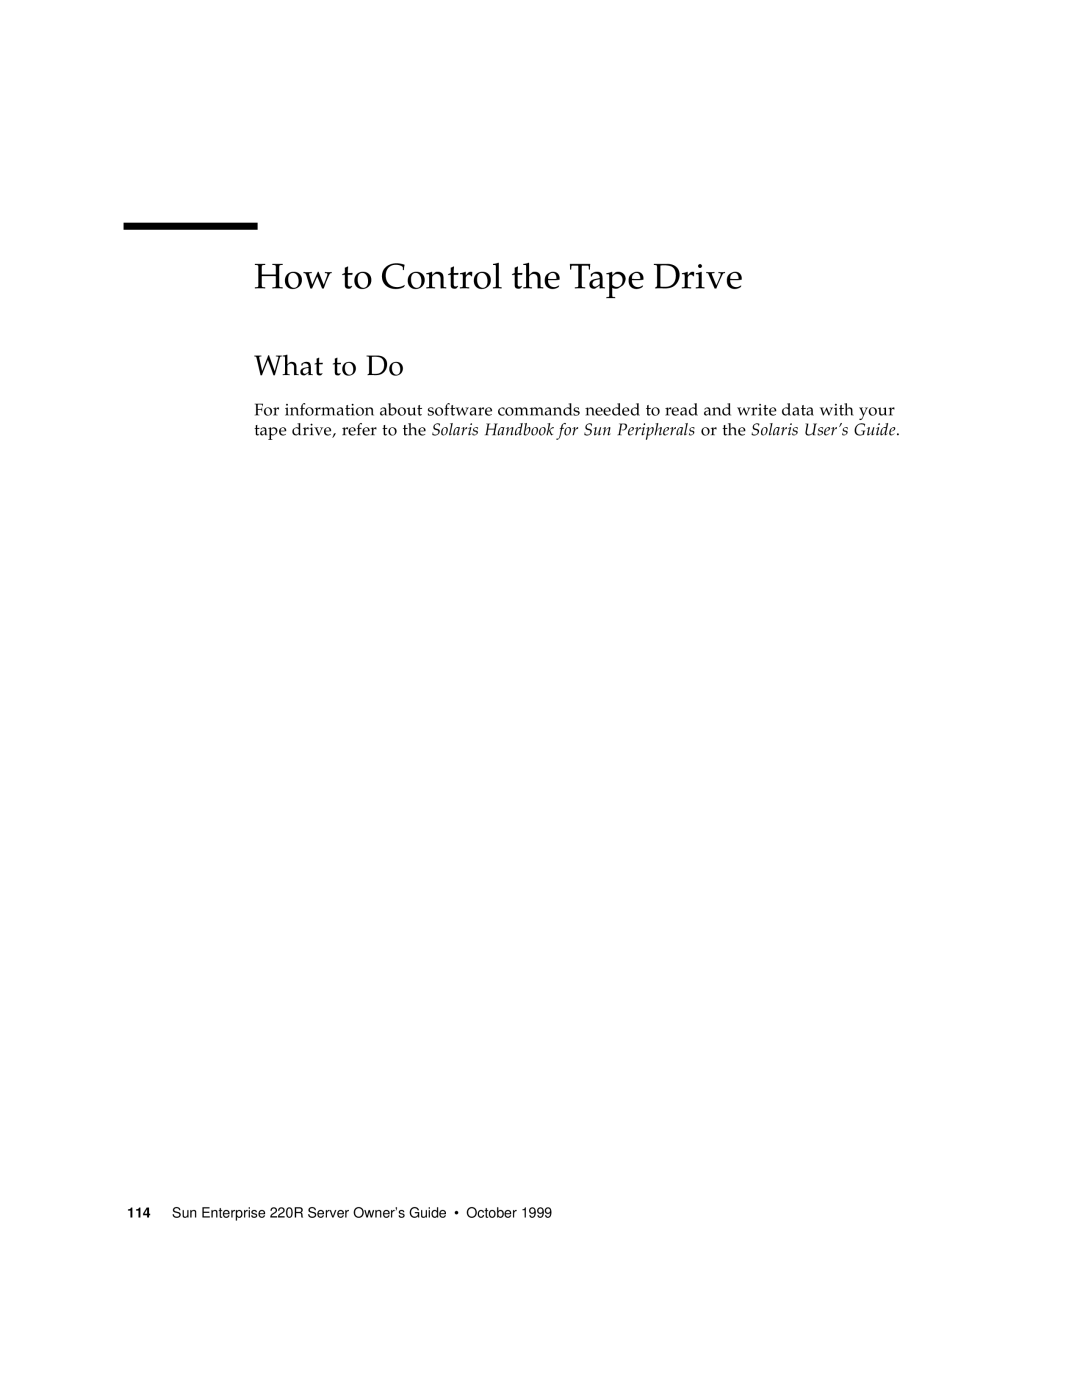 Sun Microsystems manual How to Control the Tape Drive, What to Do, Sun Enterprise 220R Server Owner’s Guide October 